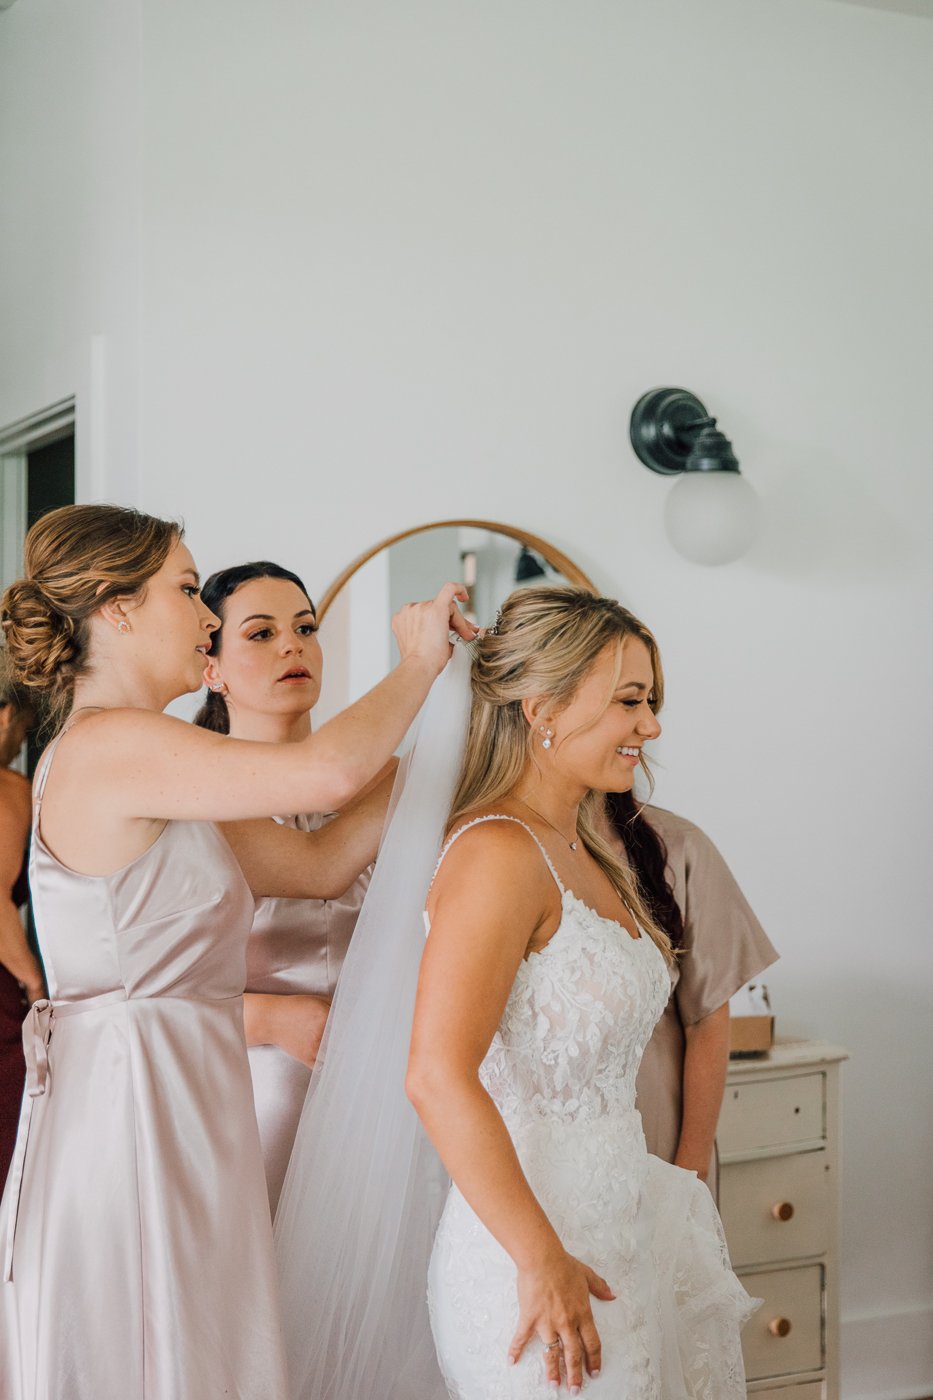  Bridesmaids put a Bride’s veil into her hair as she gets ready for her fingerlakes wedding 